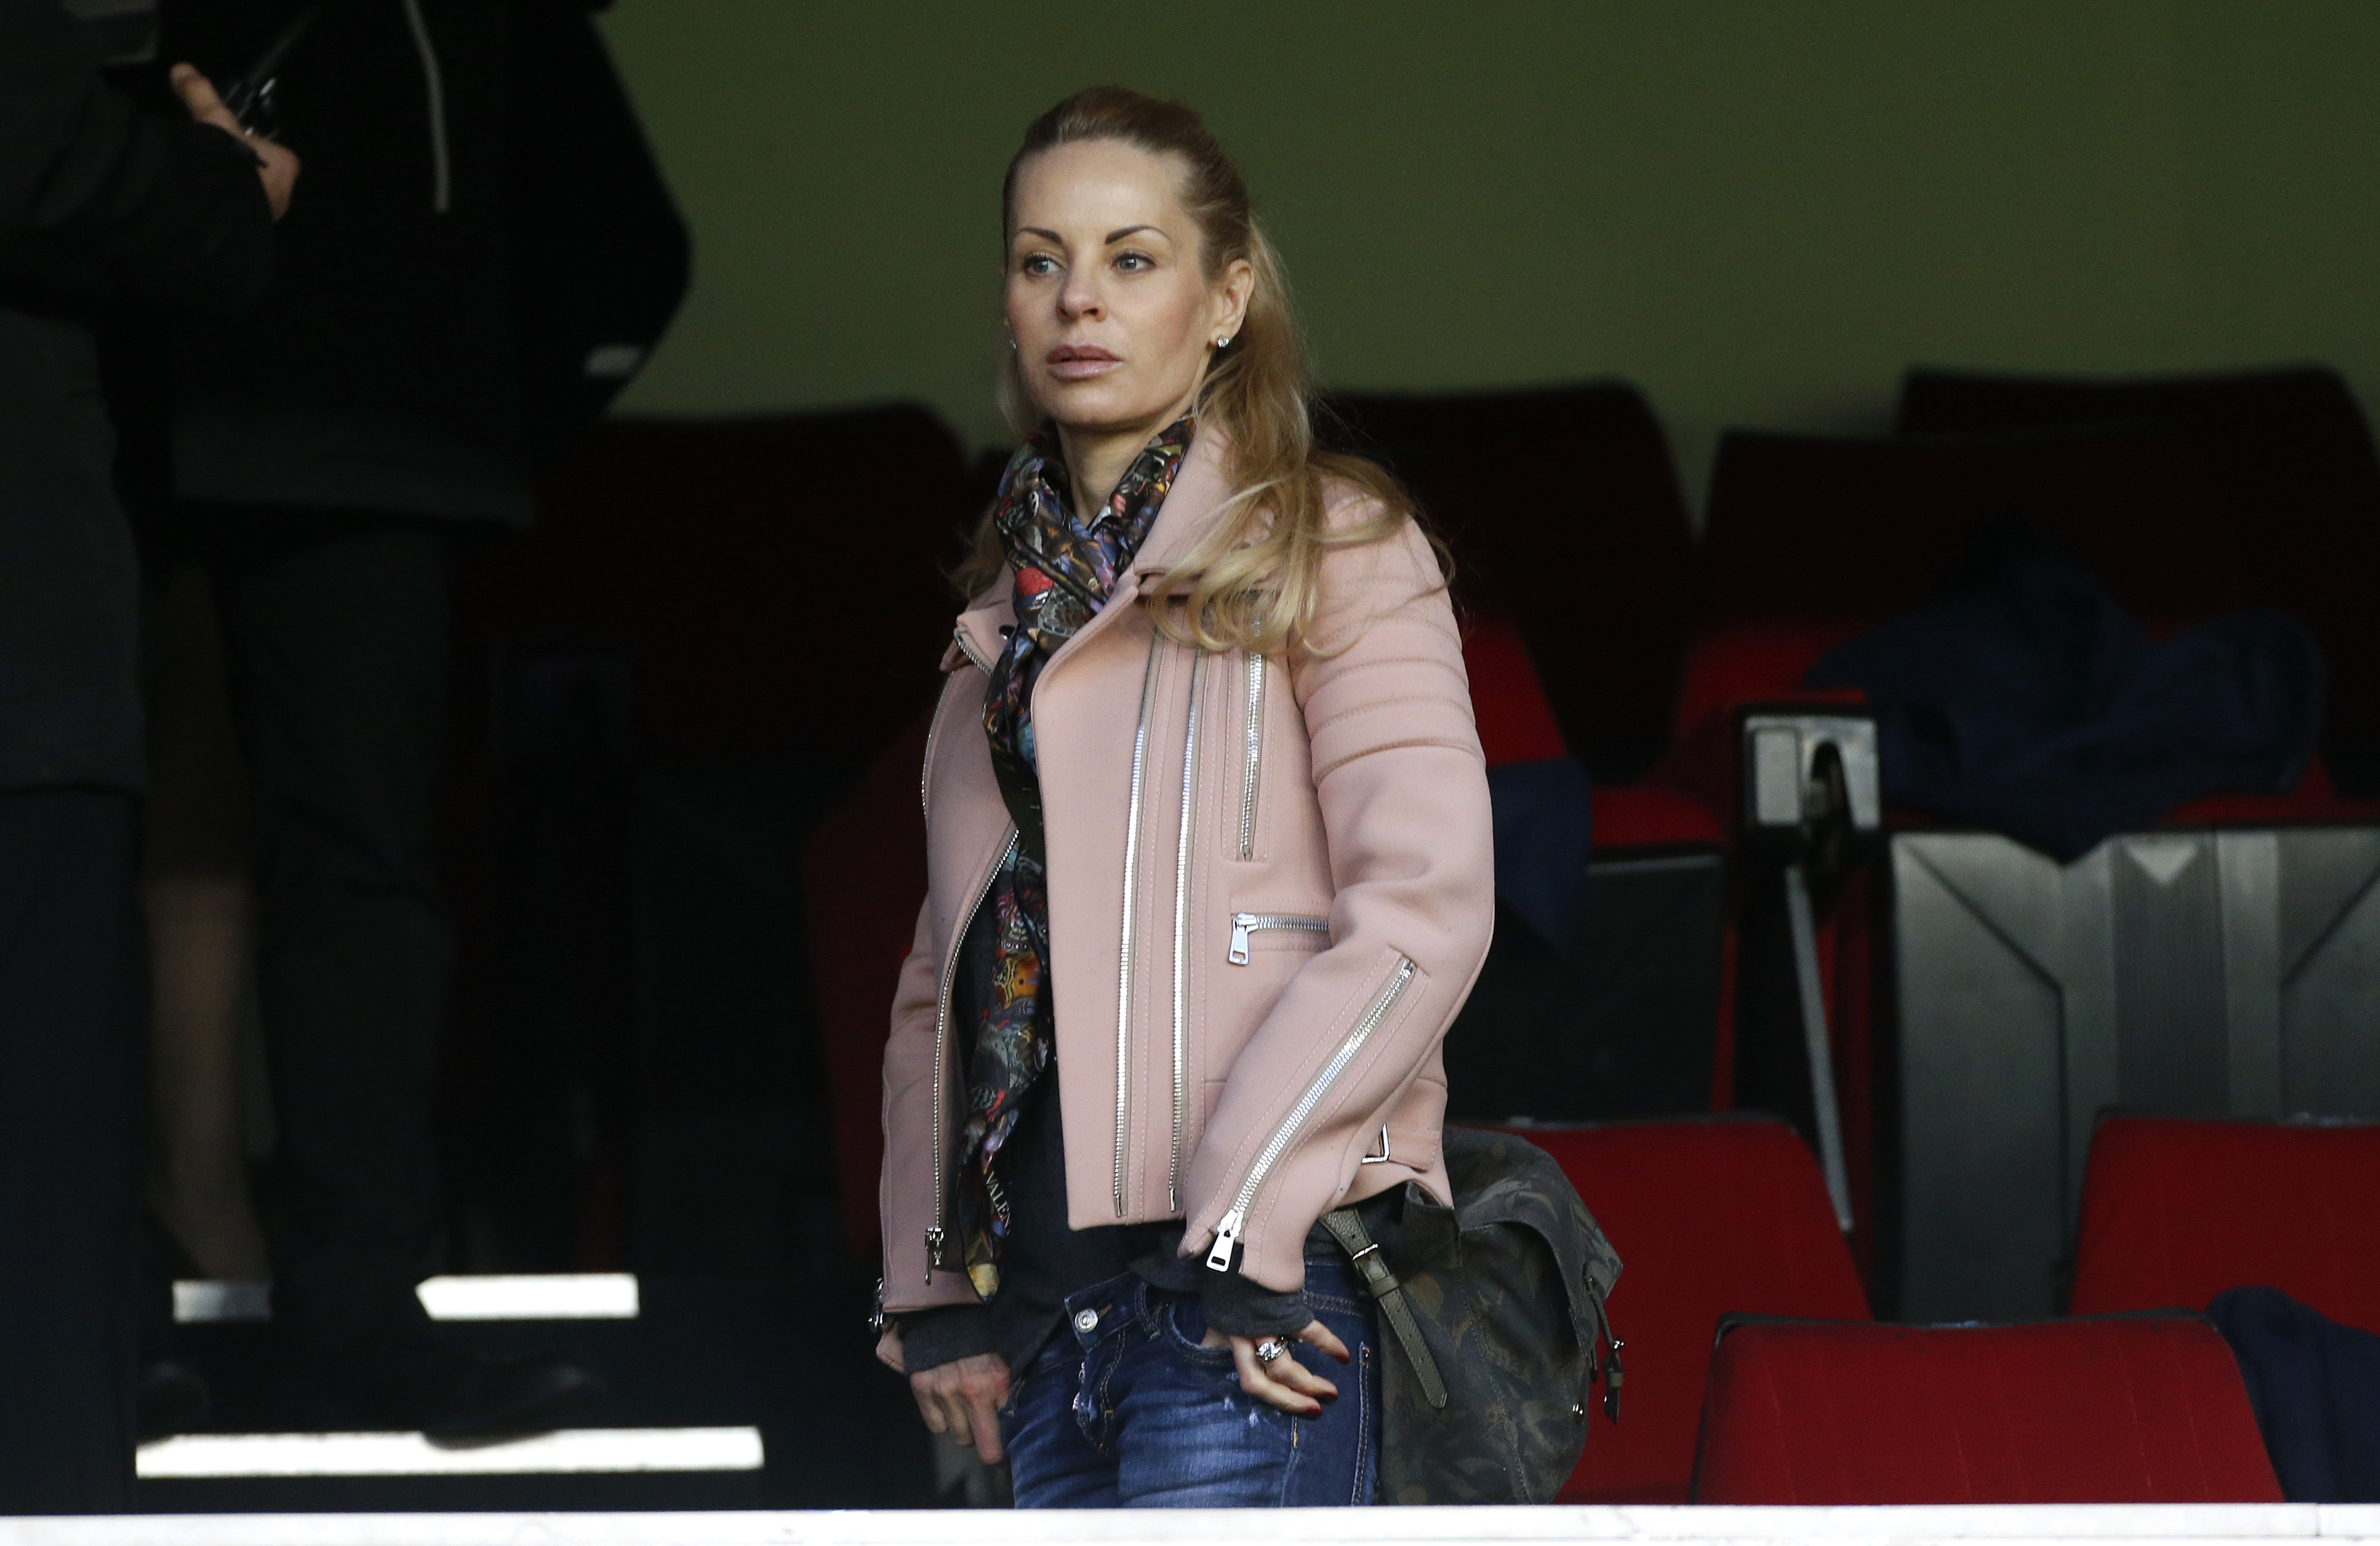 Helena Seger attends the French Ligue 1 match between Paris Saint-Germain FC and Stade Malherbe Caen at Parc des Princes Stadium on February 14, 2015, in Paris, France. | Source: Getty Images